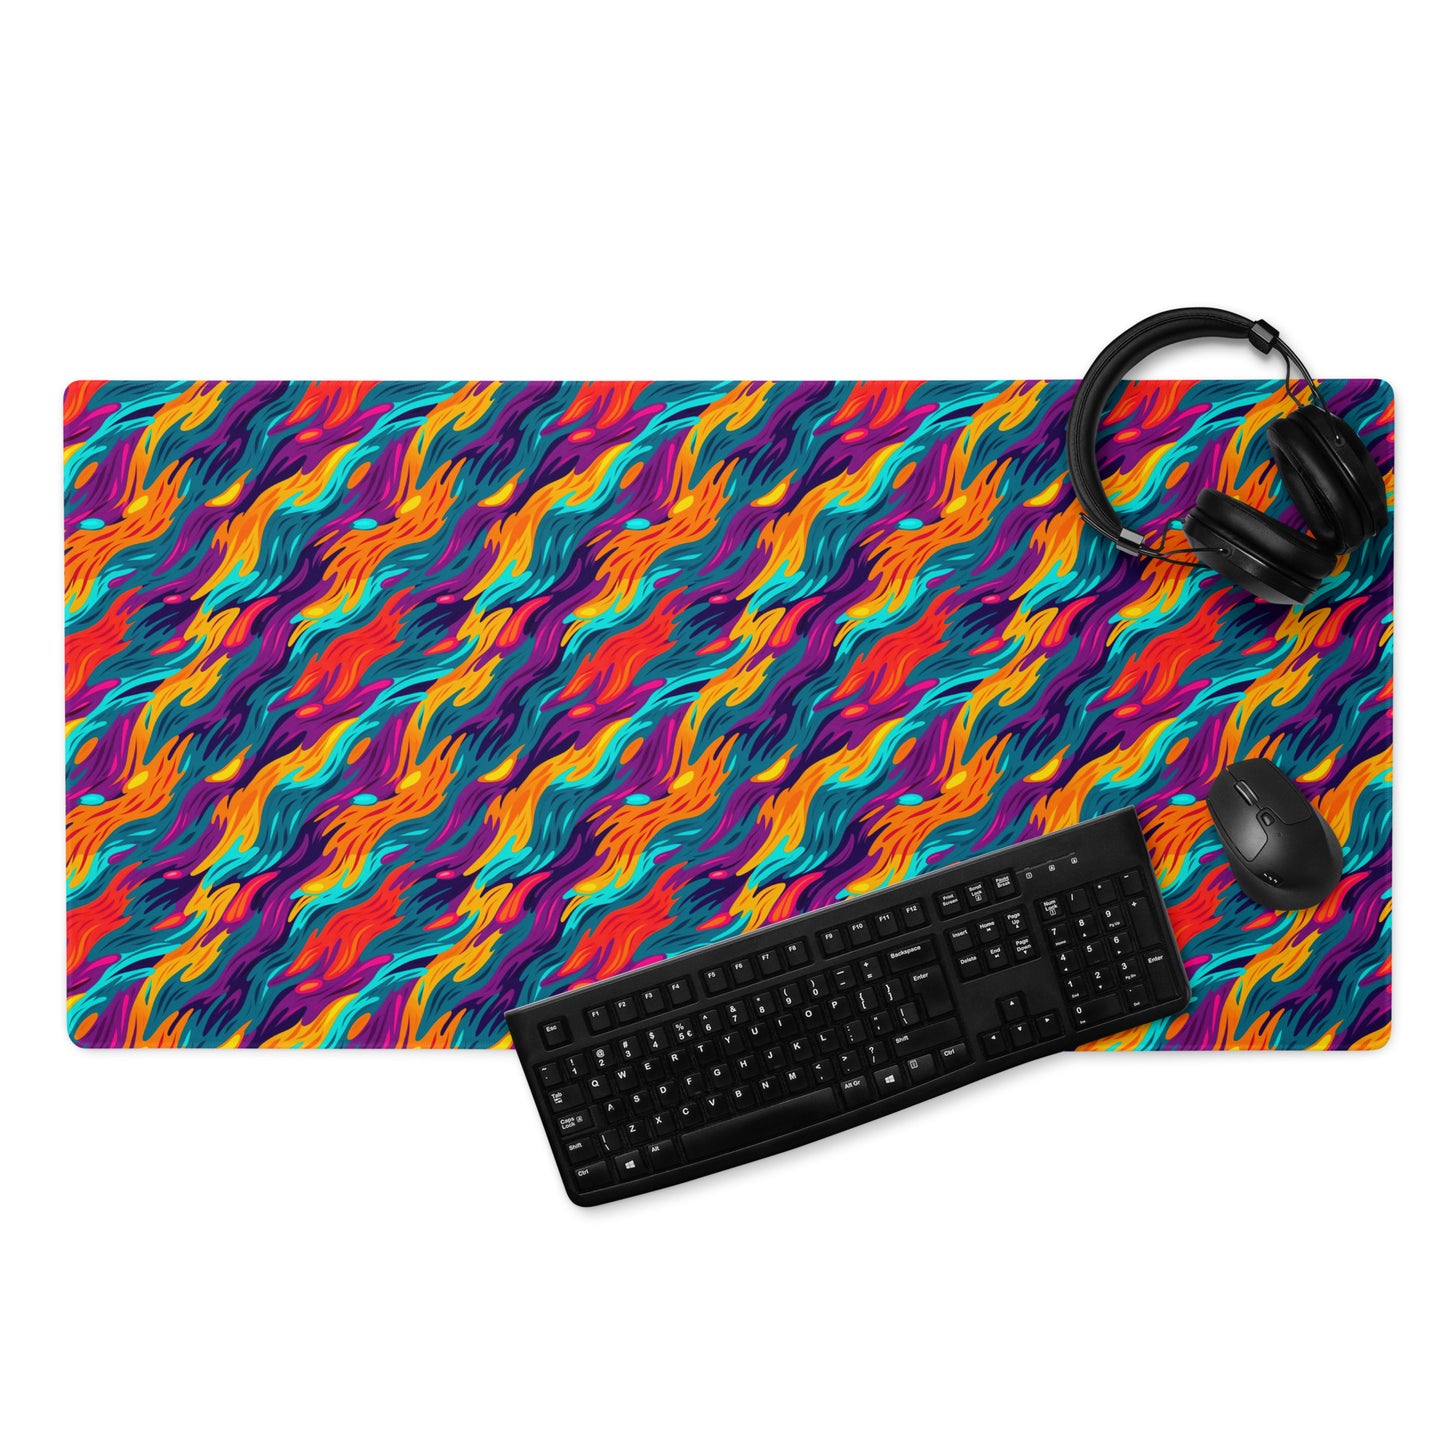 A 36" x 18" desk pad with a wavy flame pattern on it displayed with a keyboard, headphones and a mouse. Rainbow in color.